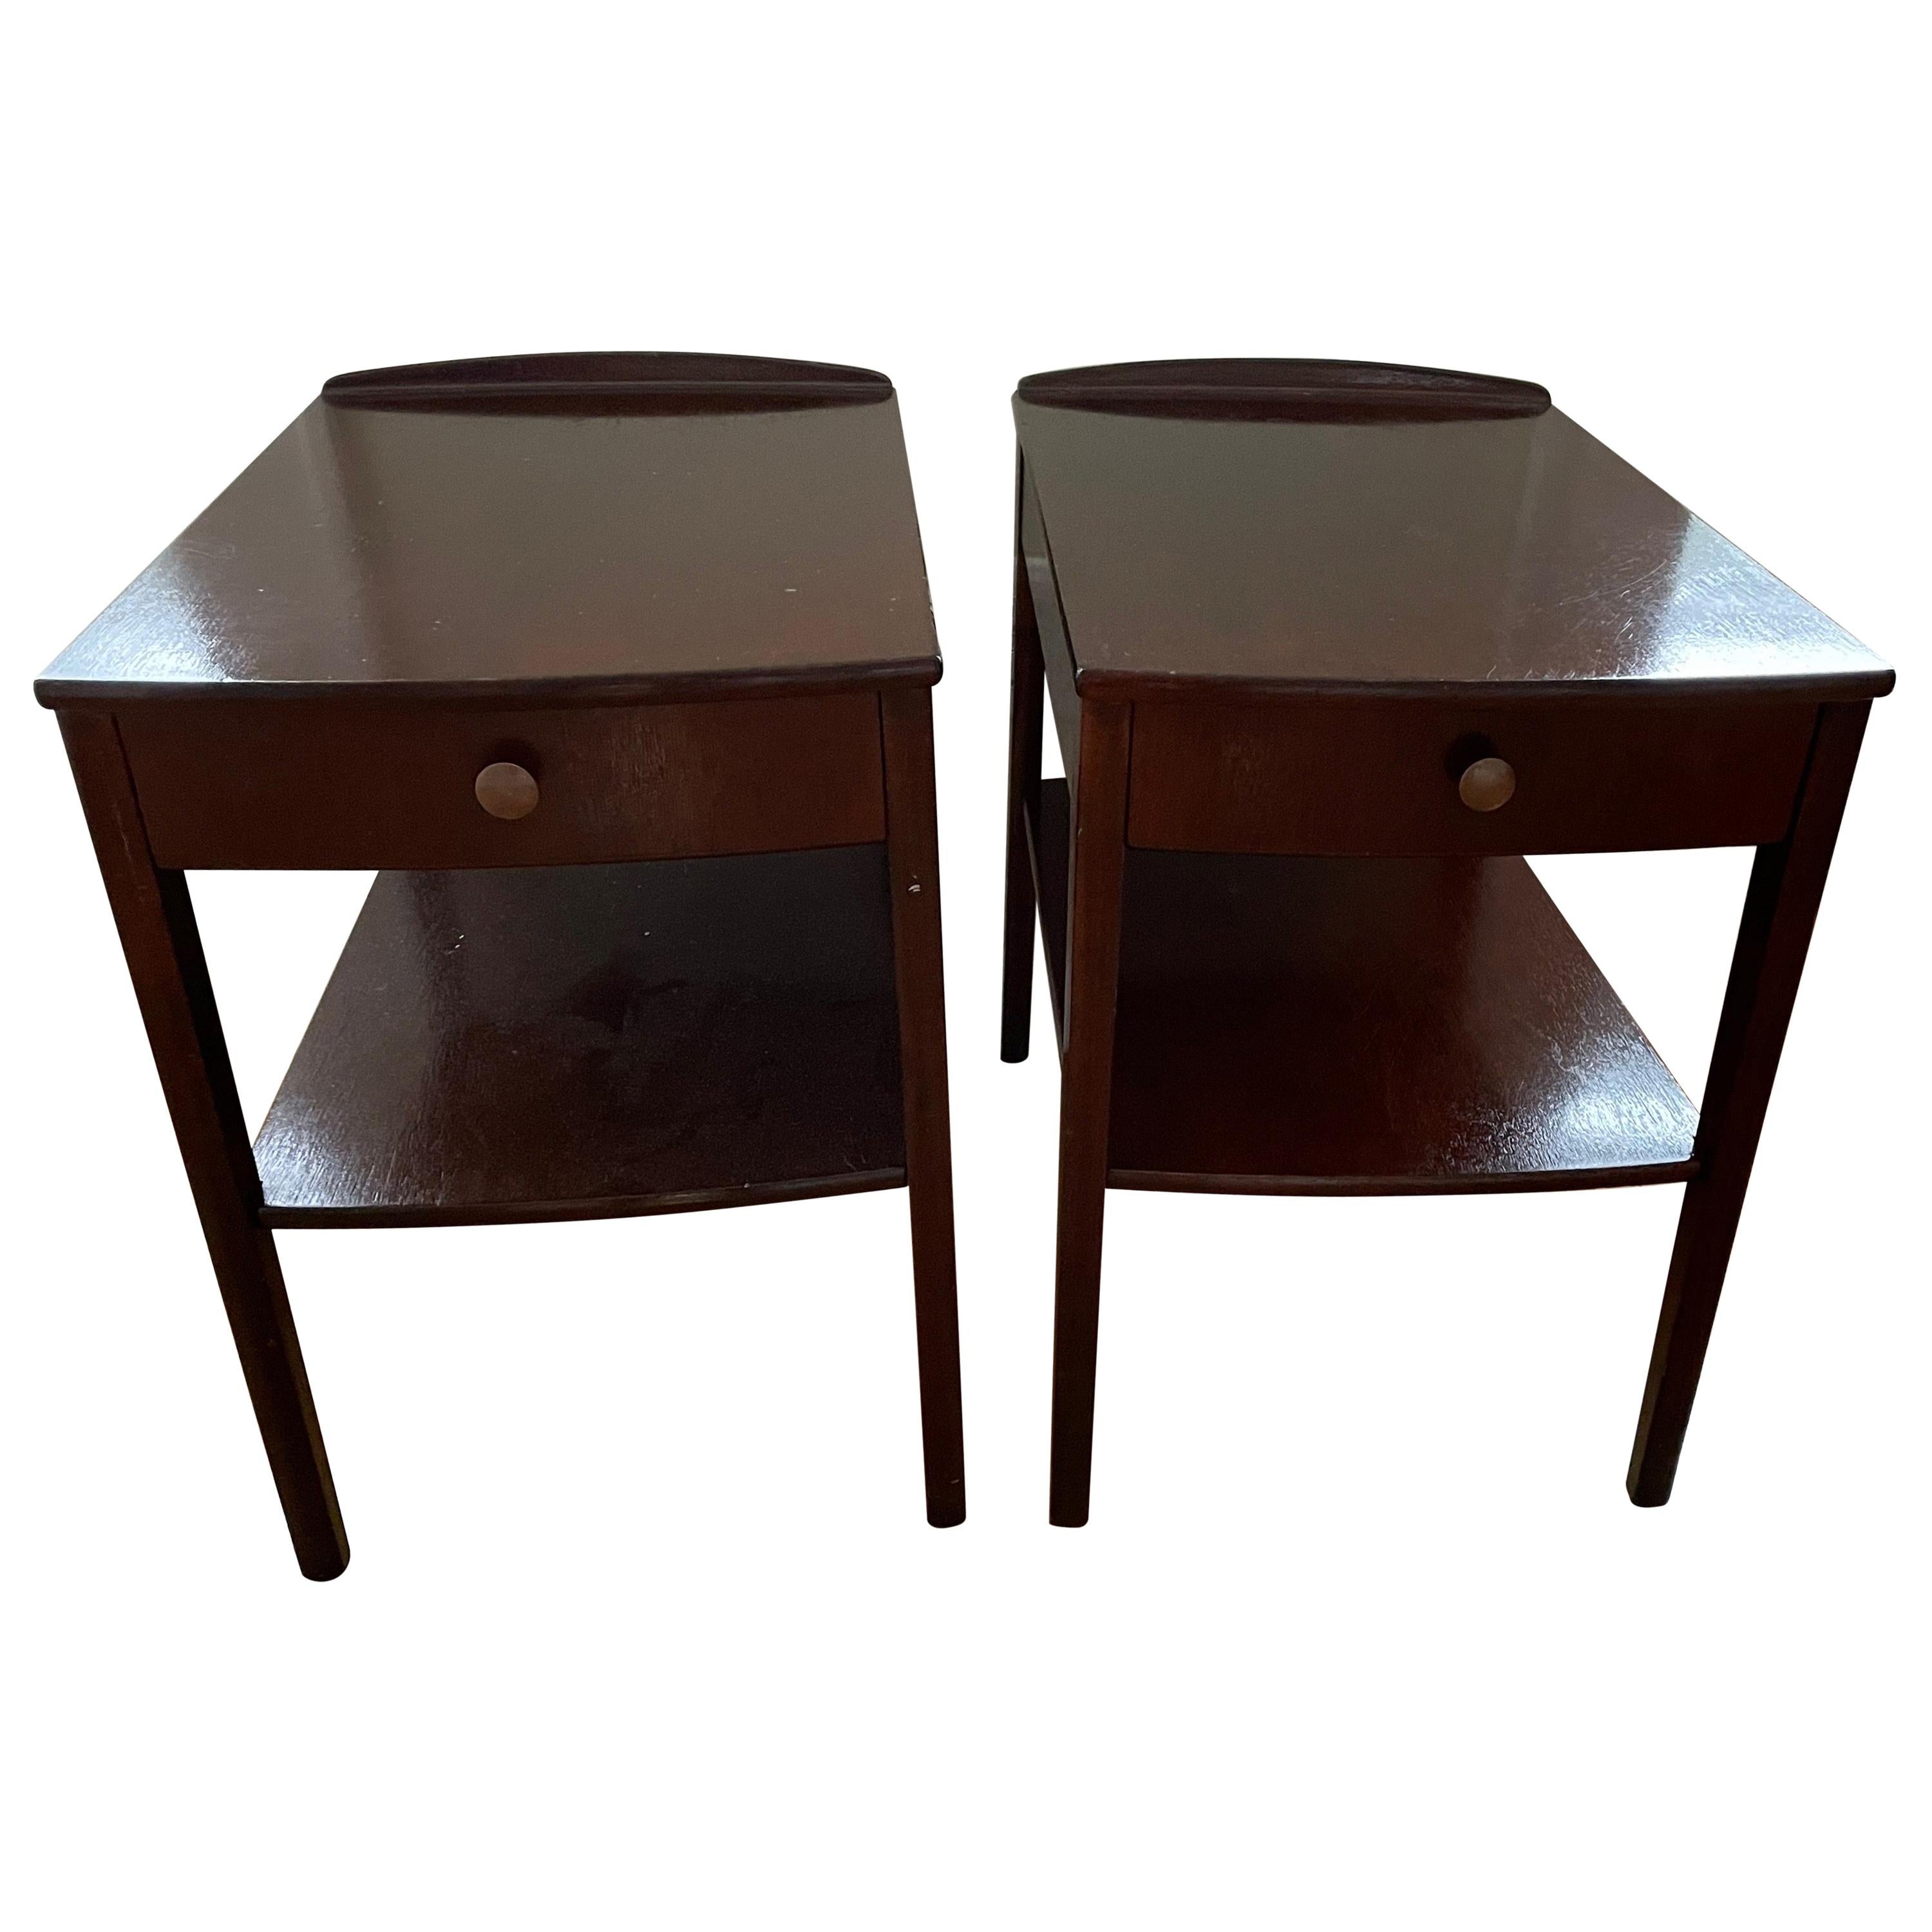 Pair of Scandinavian Modern End Tables / Night Tables